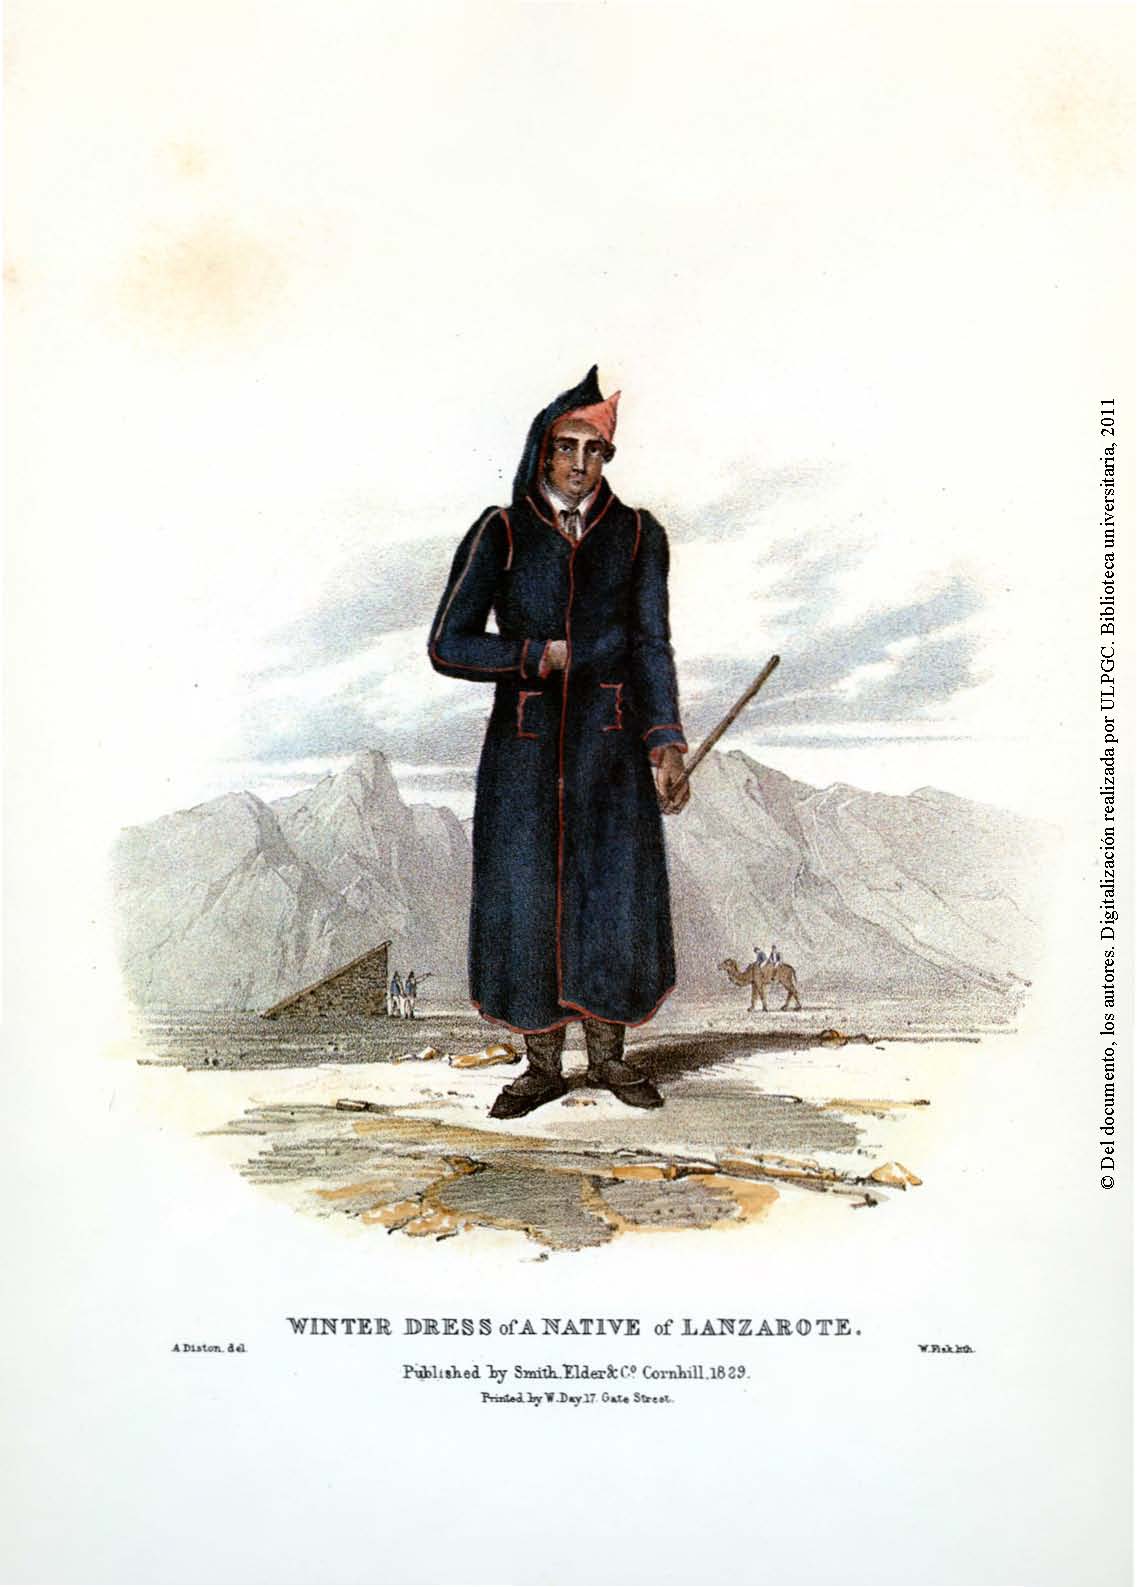 Winter dress of a native of Lanzarote